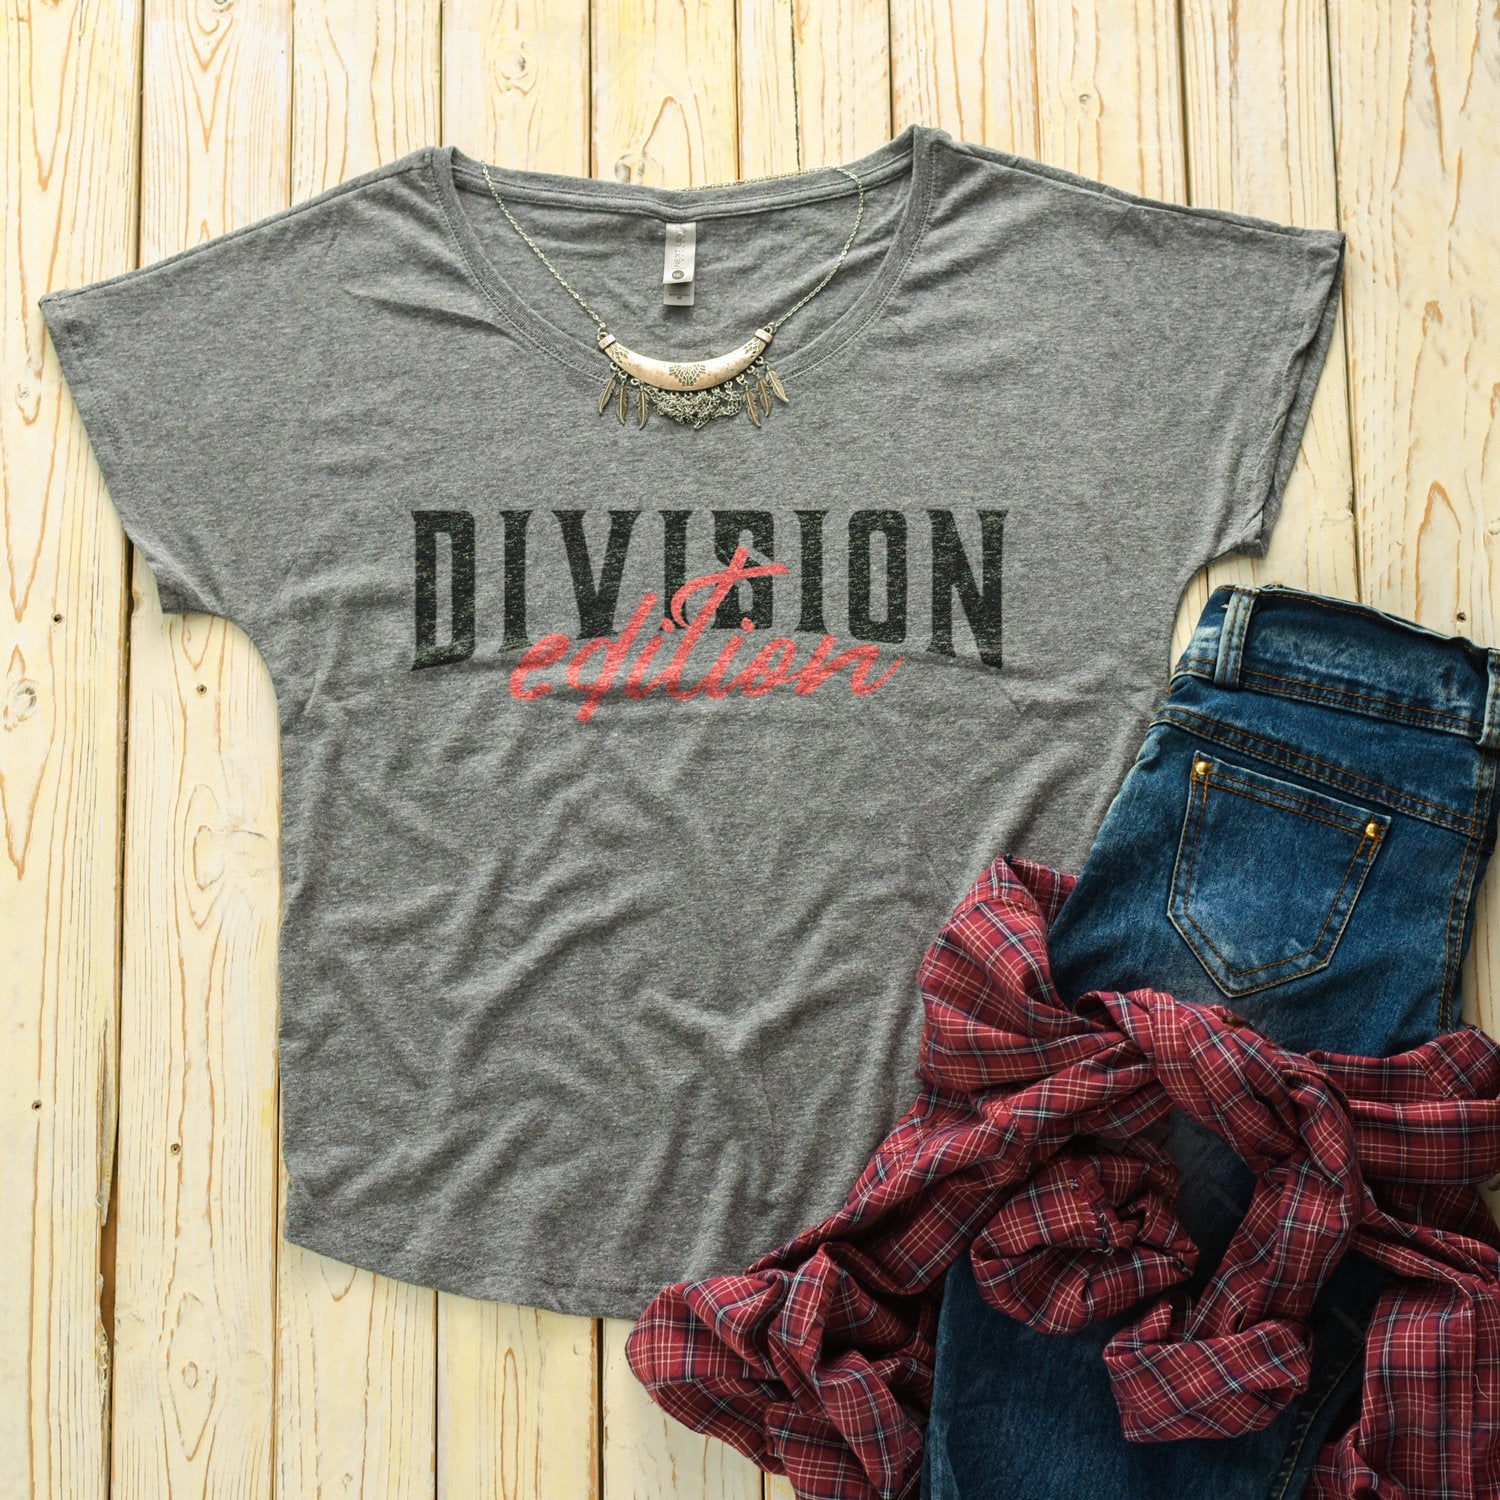 Download Shirt Mockup Women S Triblend Dolman Tee Apparel Photography Outfit Flat Lay 6760 Premium Heather Next Level Color Photography Deshpandefoundationindia Org